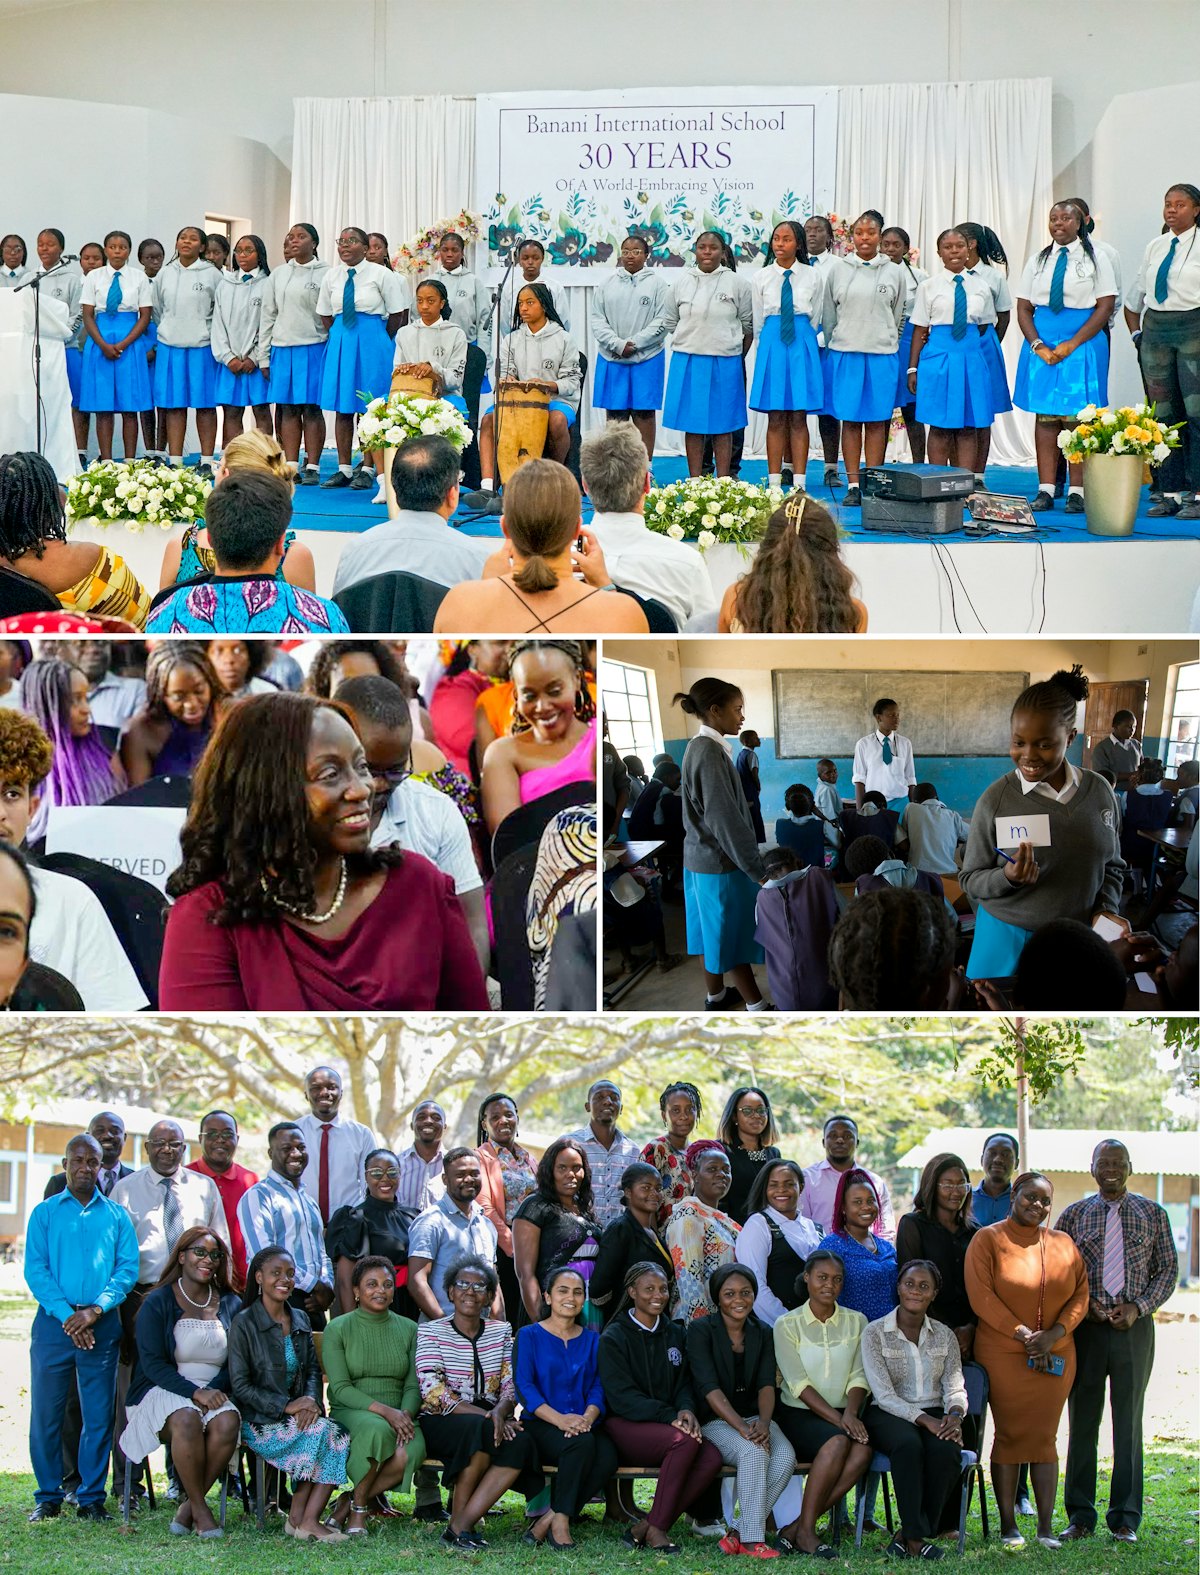 Well known for promoting the education of young women, the Banani International School in Zambia celebrated its 30th anniversary. The school’s multifaceted educational approach integrates intellectual pursuits with the acquisition of moral understanding and spiritual insights, cultivating a rich learning environment.